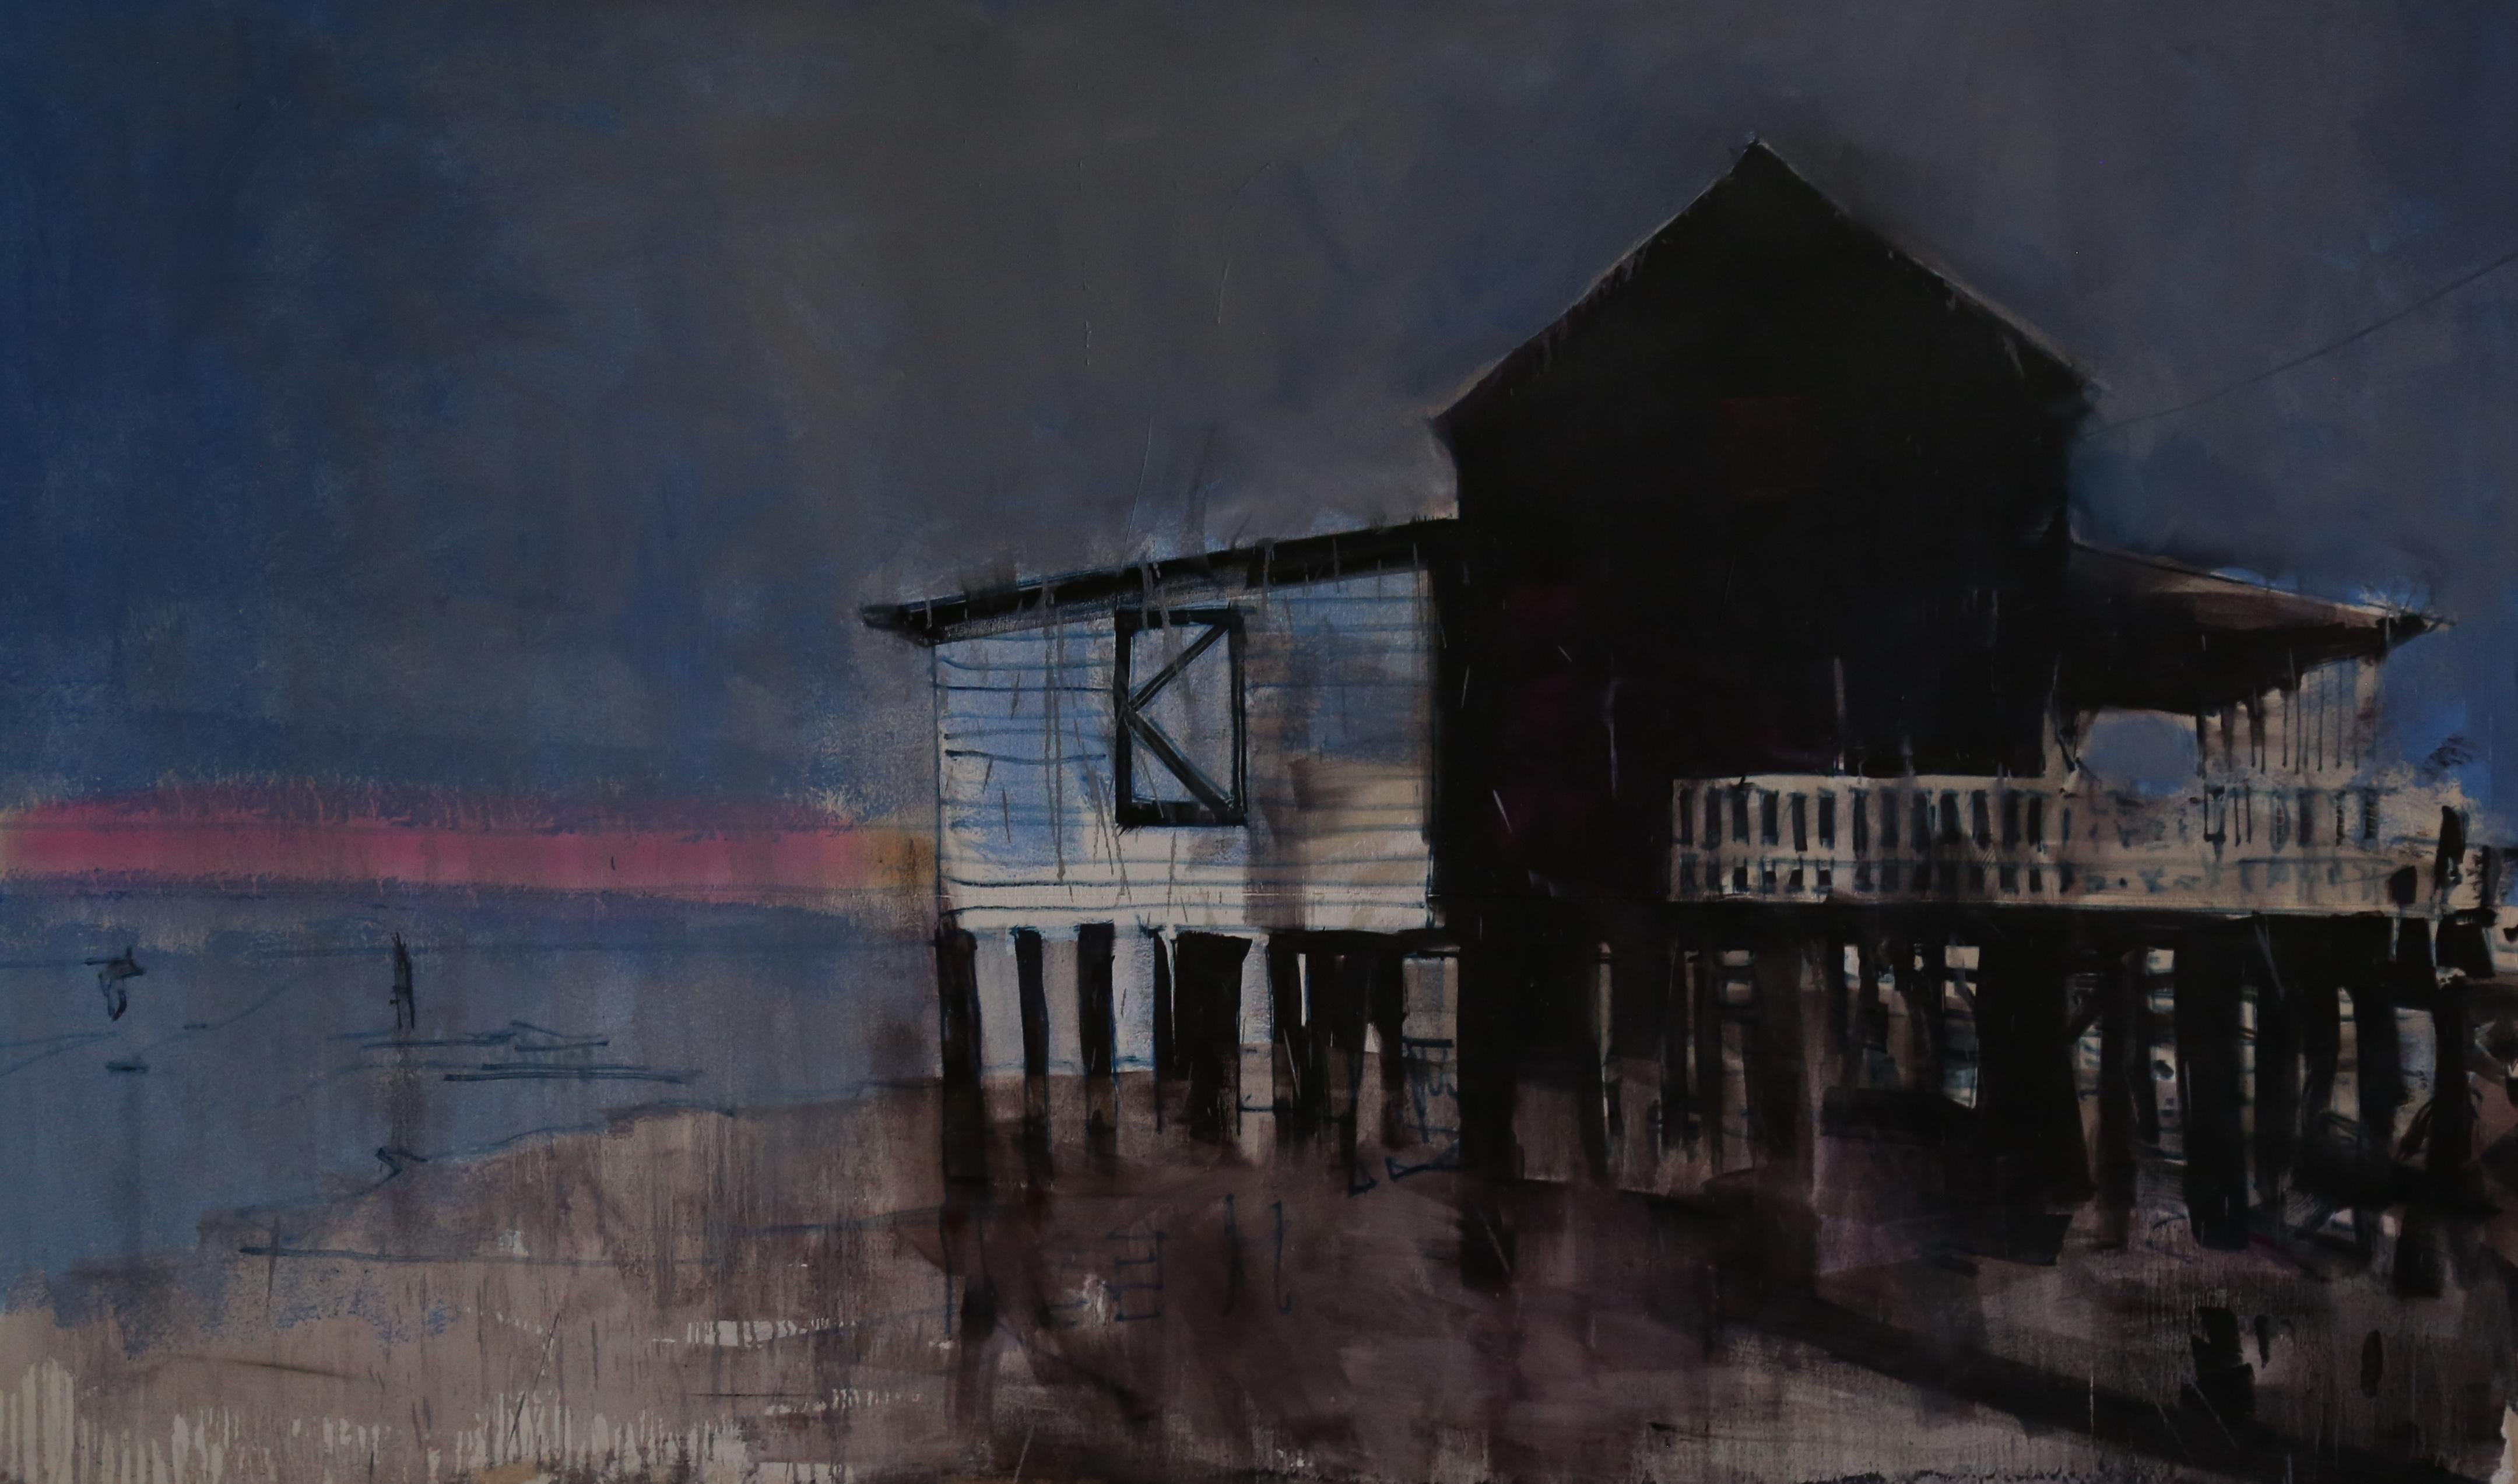 House by the ocean after sunset, 100x150cm - Art by Nikita Pavlov